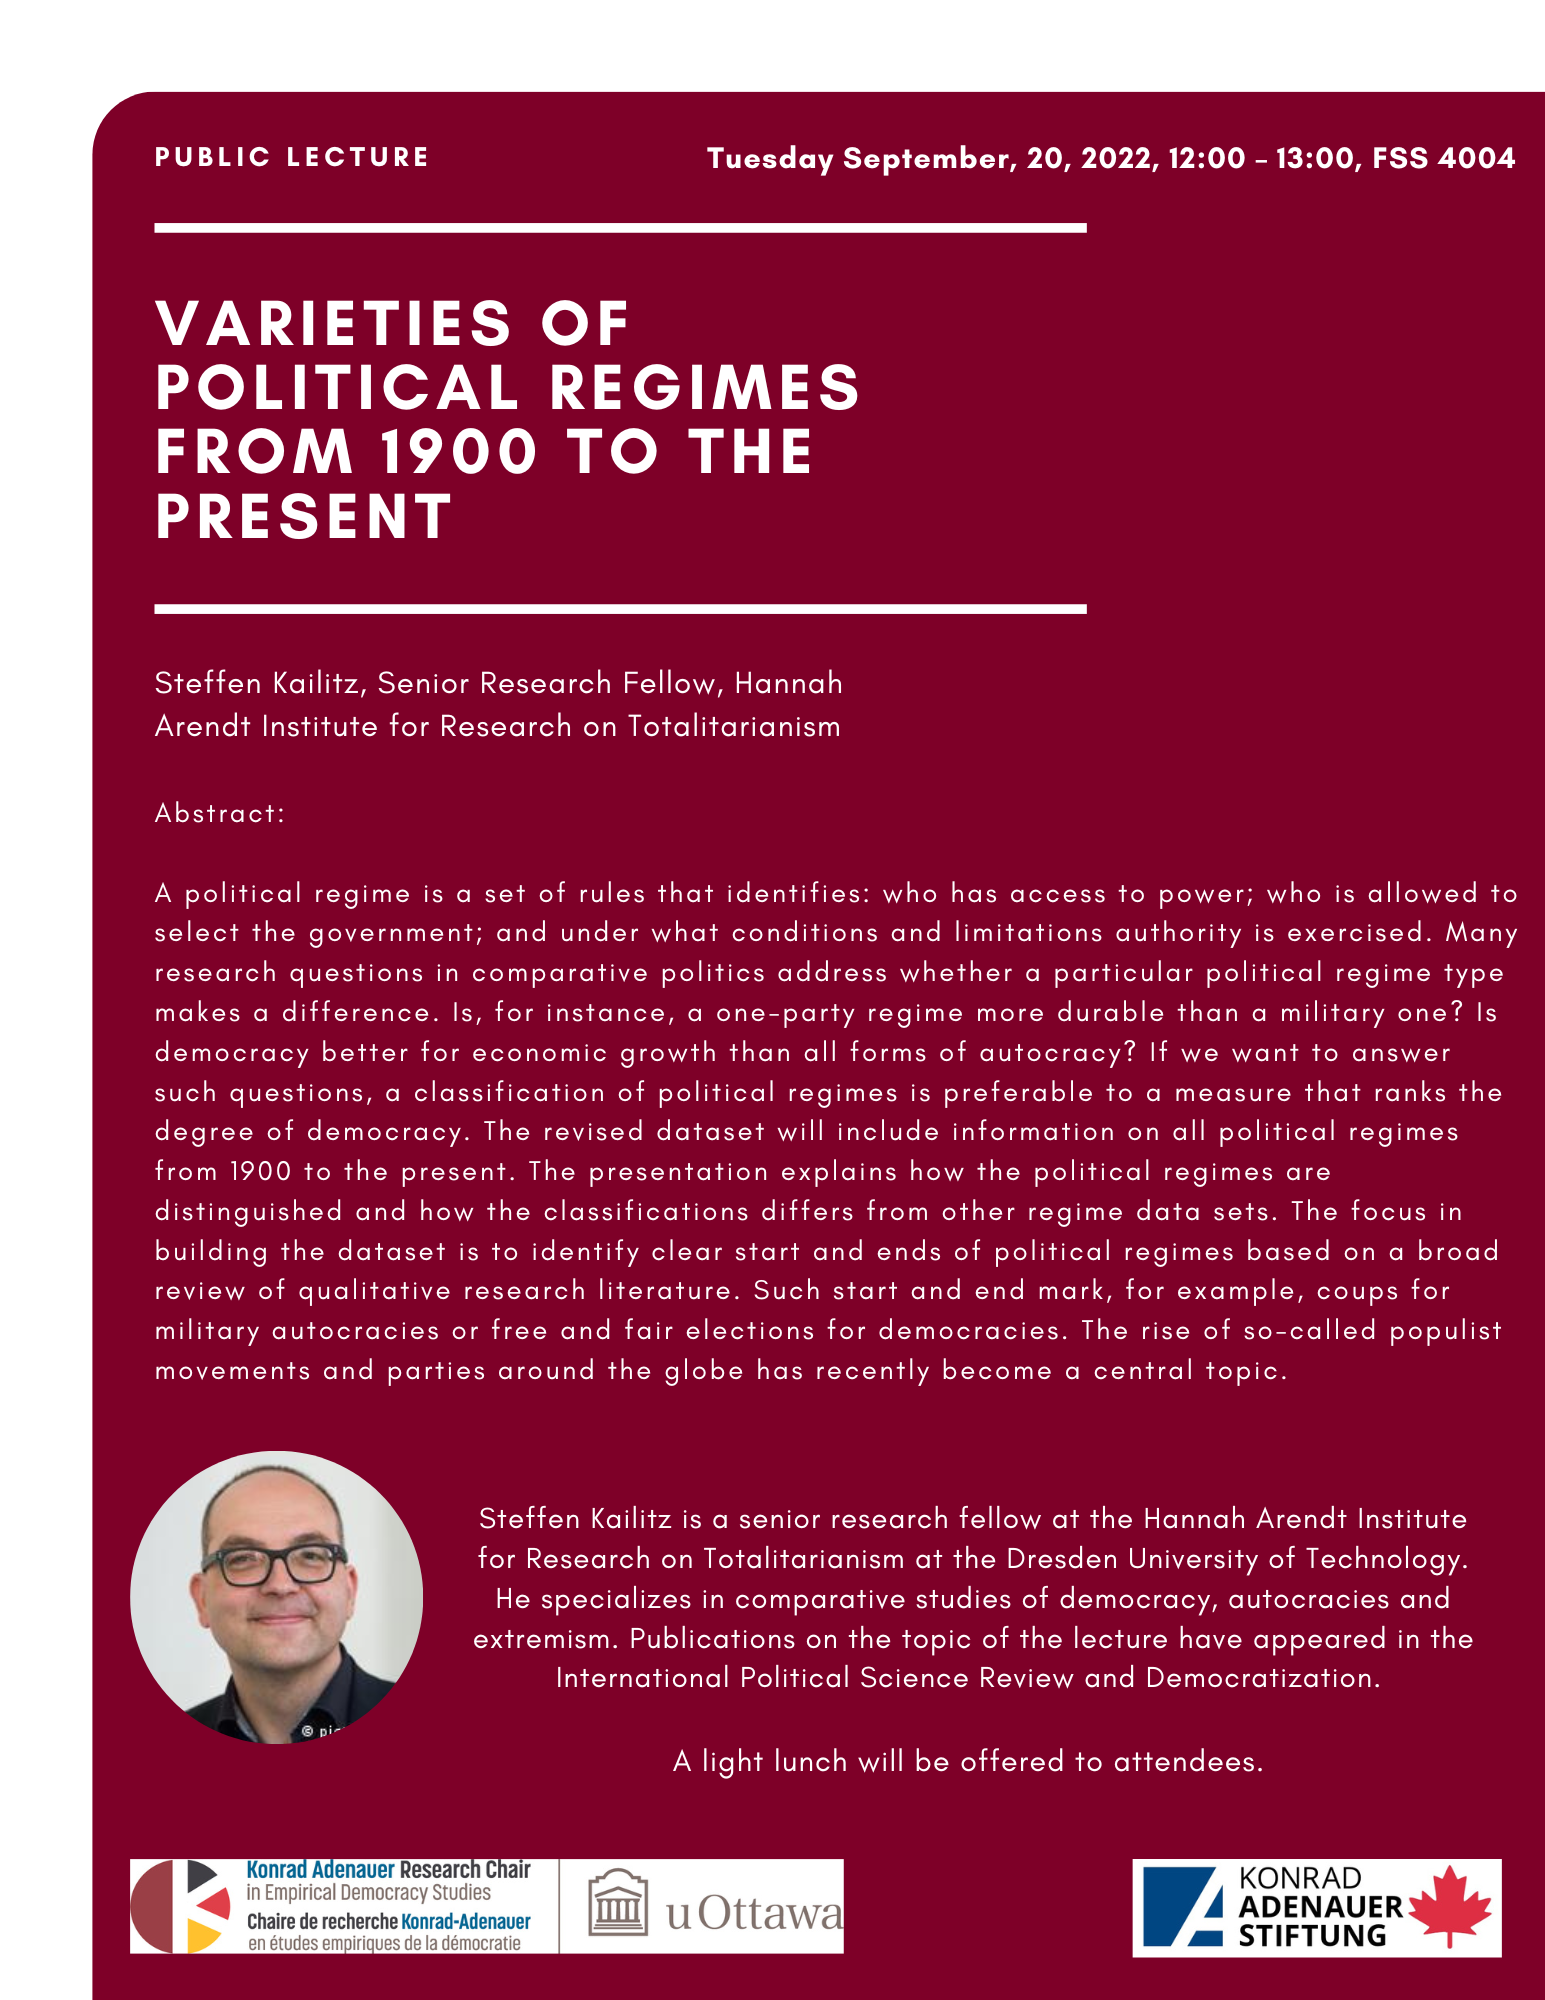 Public Lecture: Varieties of Political Regimes From 1900 To The Present